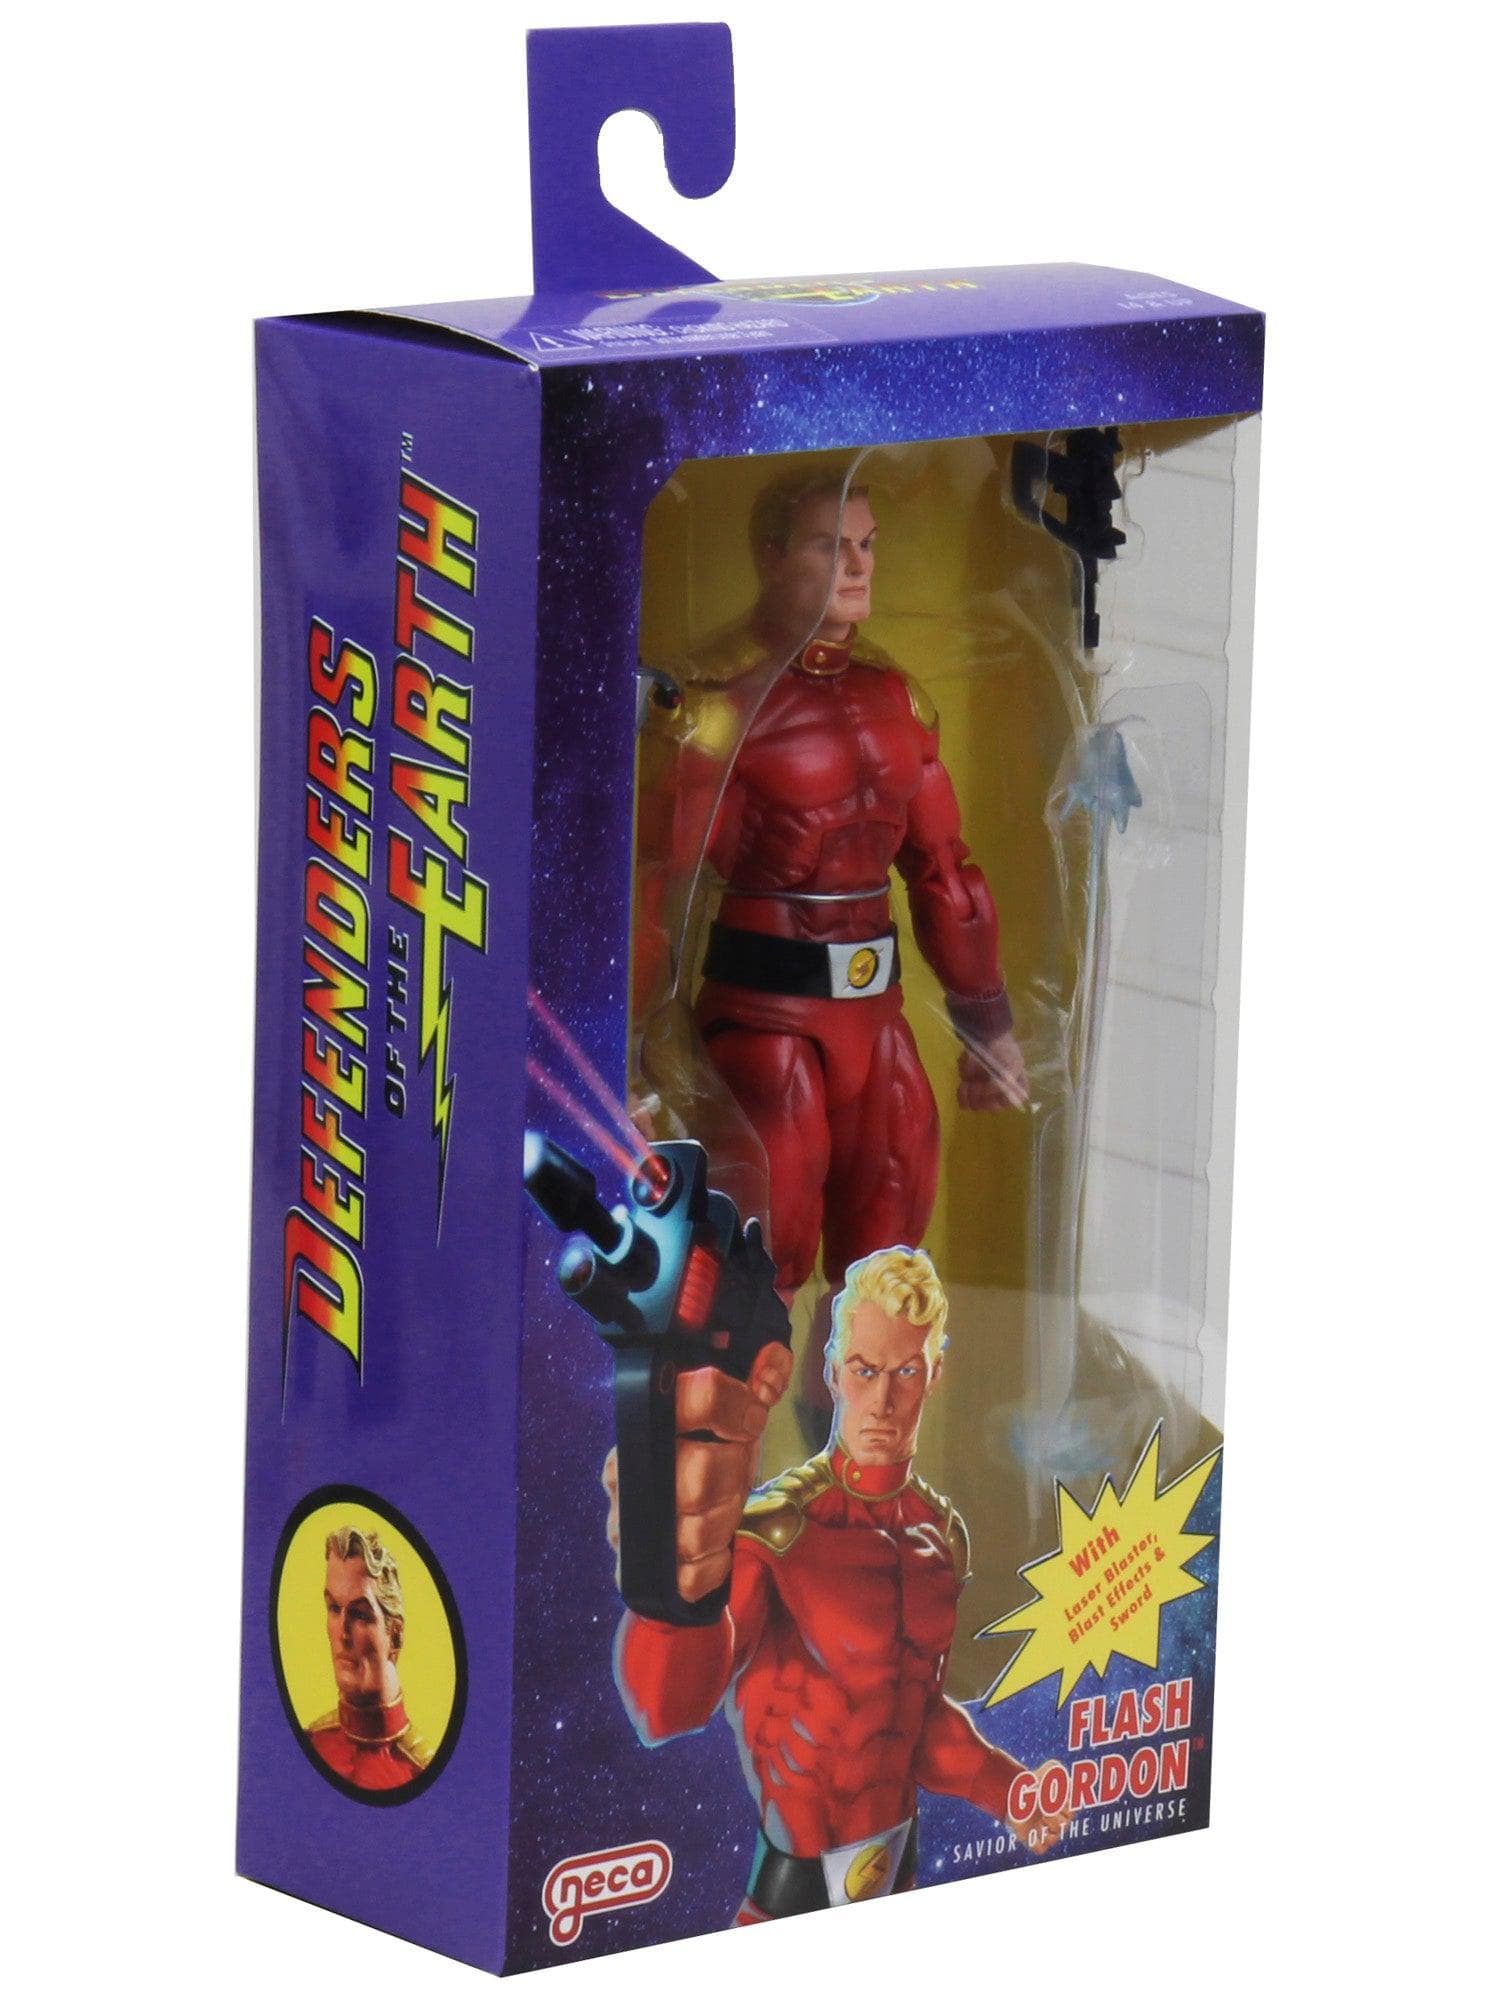 NECA - King Features - 7" Scale Action Figure - Defenders of the Earth Series Flash Gordon - costumes.com